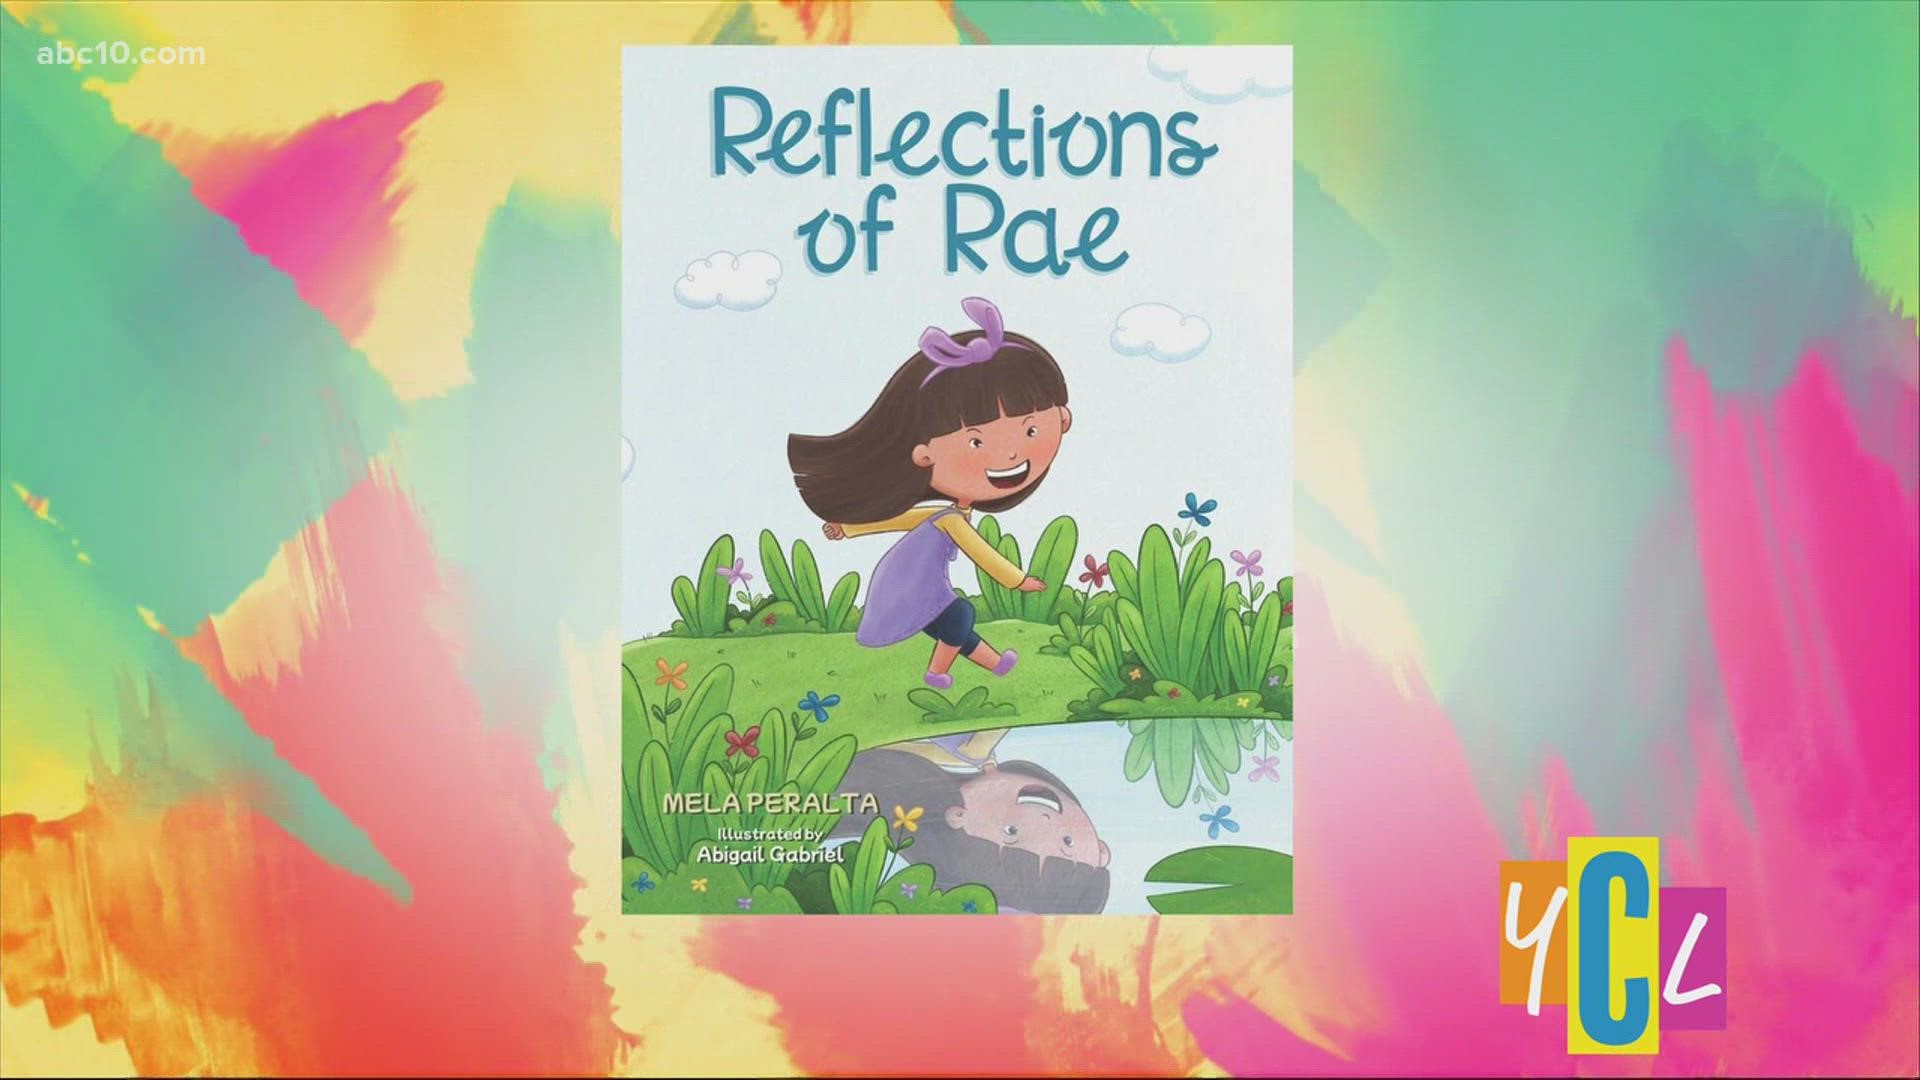 "Reflections of Rae" is a kid-friendly book to help parents talk to their children about body safety. This segment paid for by Empowered Publicity.